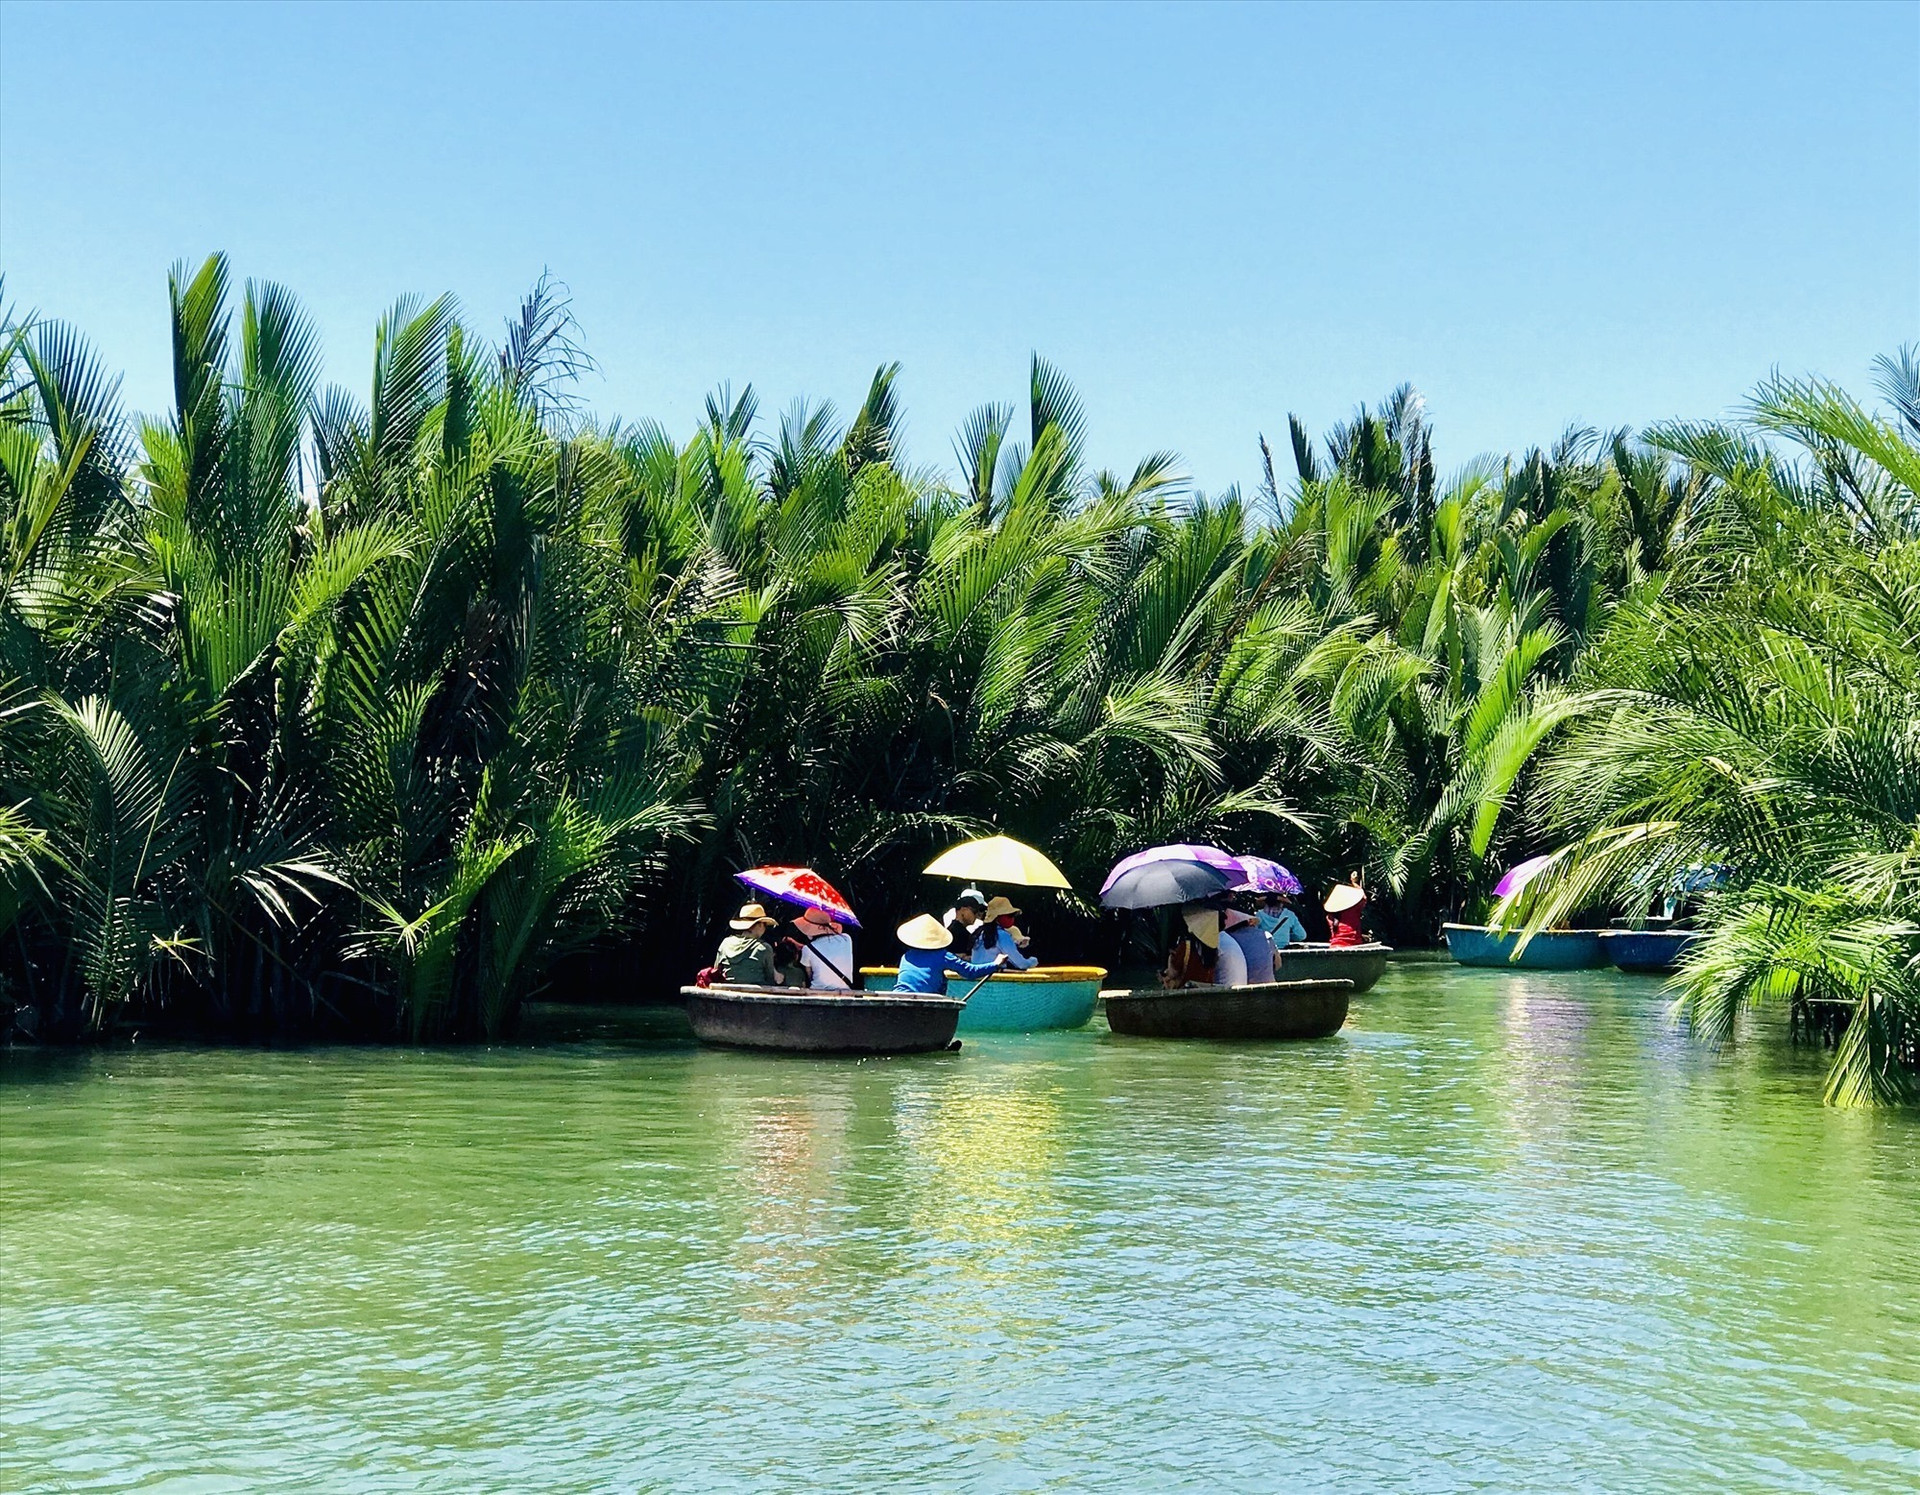 Visitors taking a sight-seeing tour around Bay Mau nipa palm forest by bamboo coracle